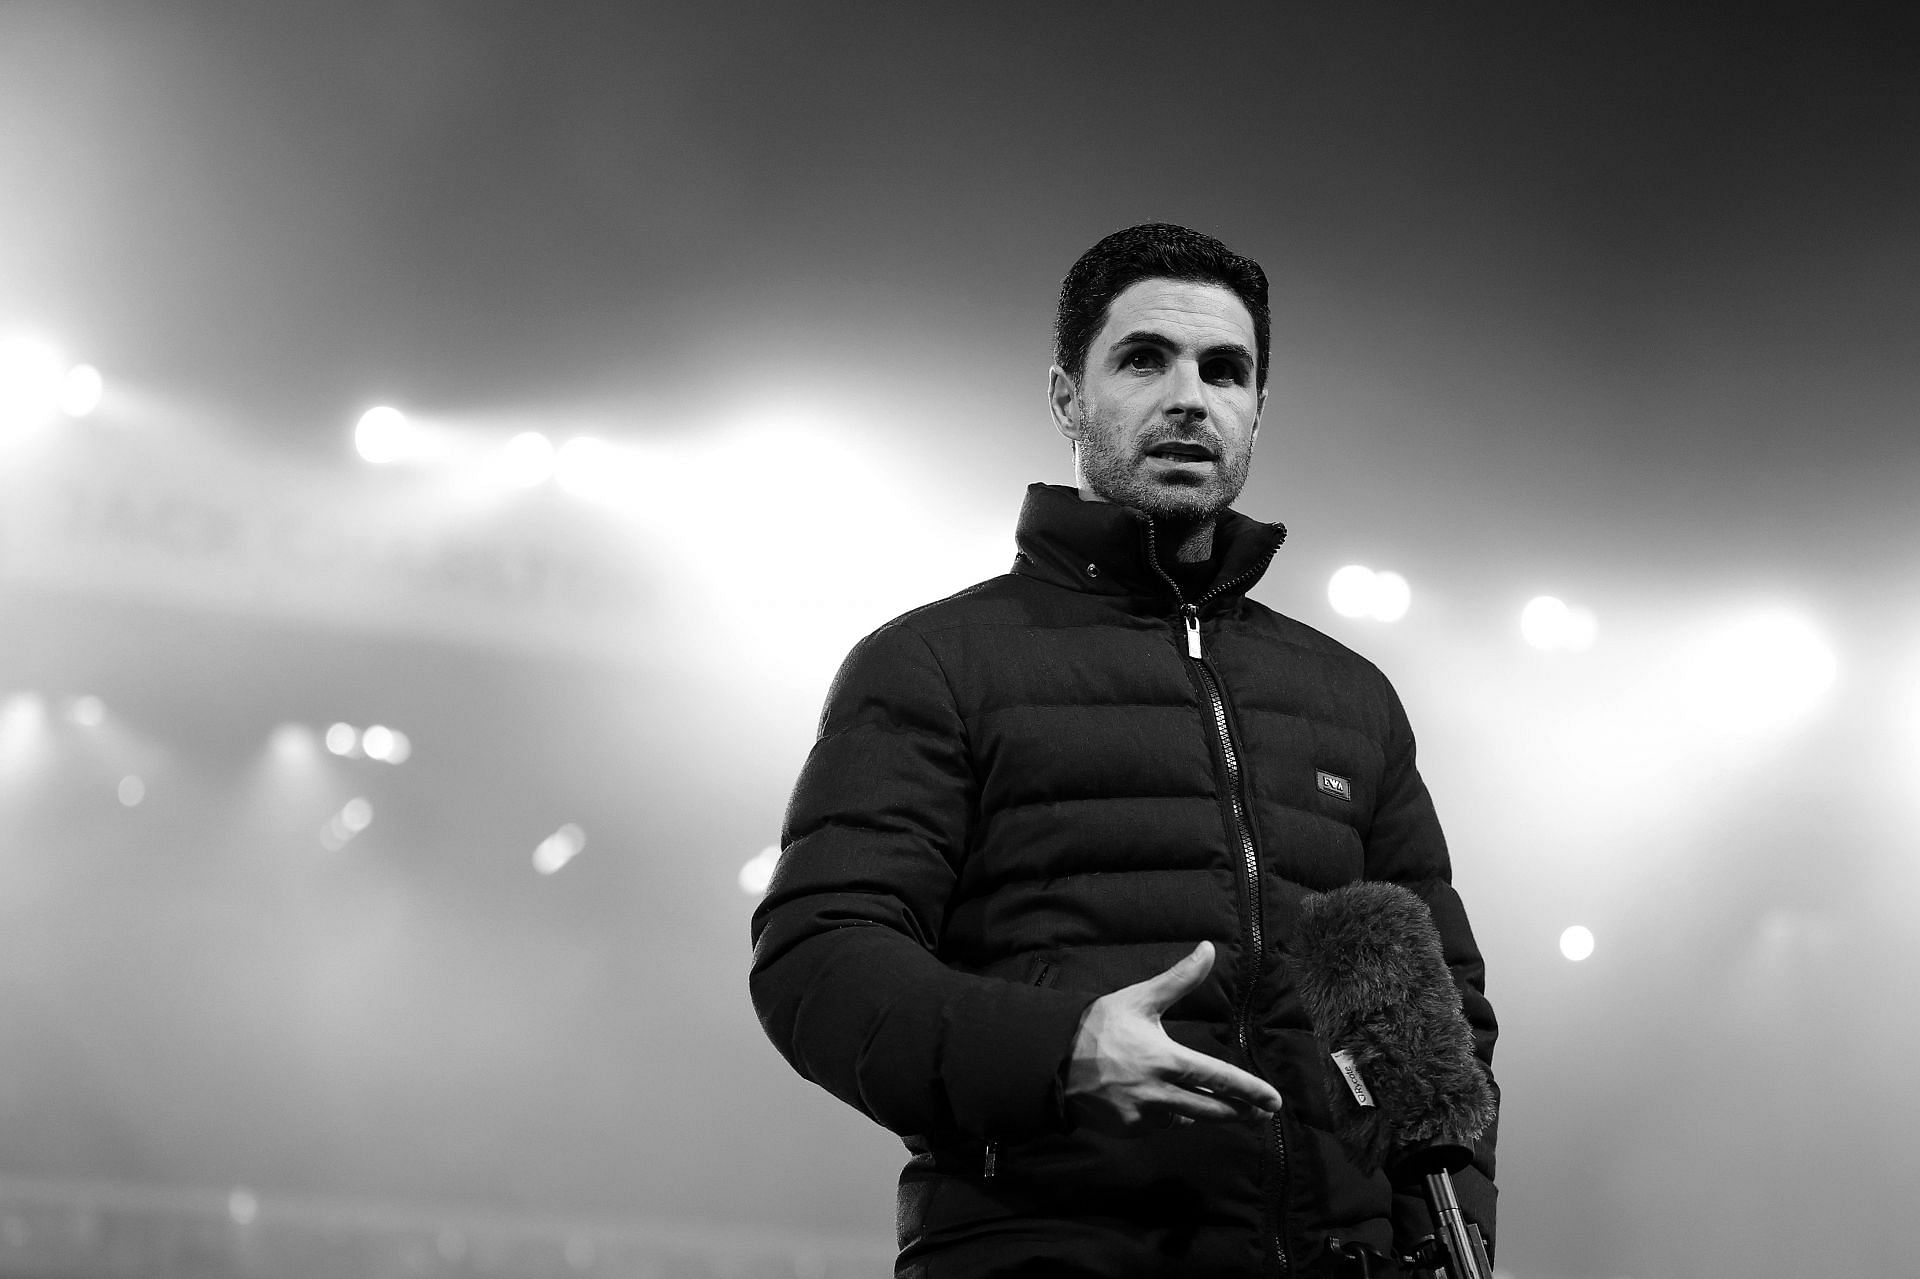 Arsenal manager Arteta is aiming for a top-four finish